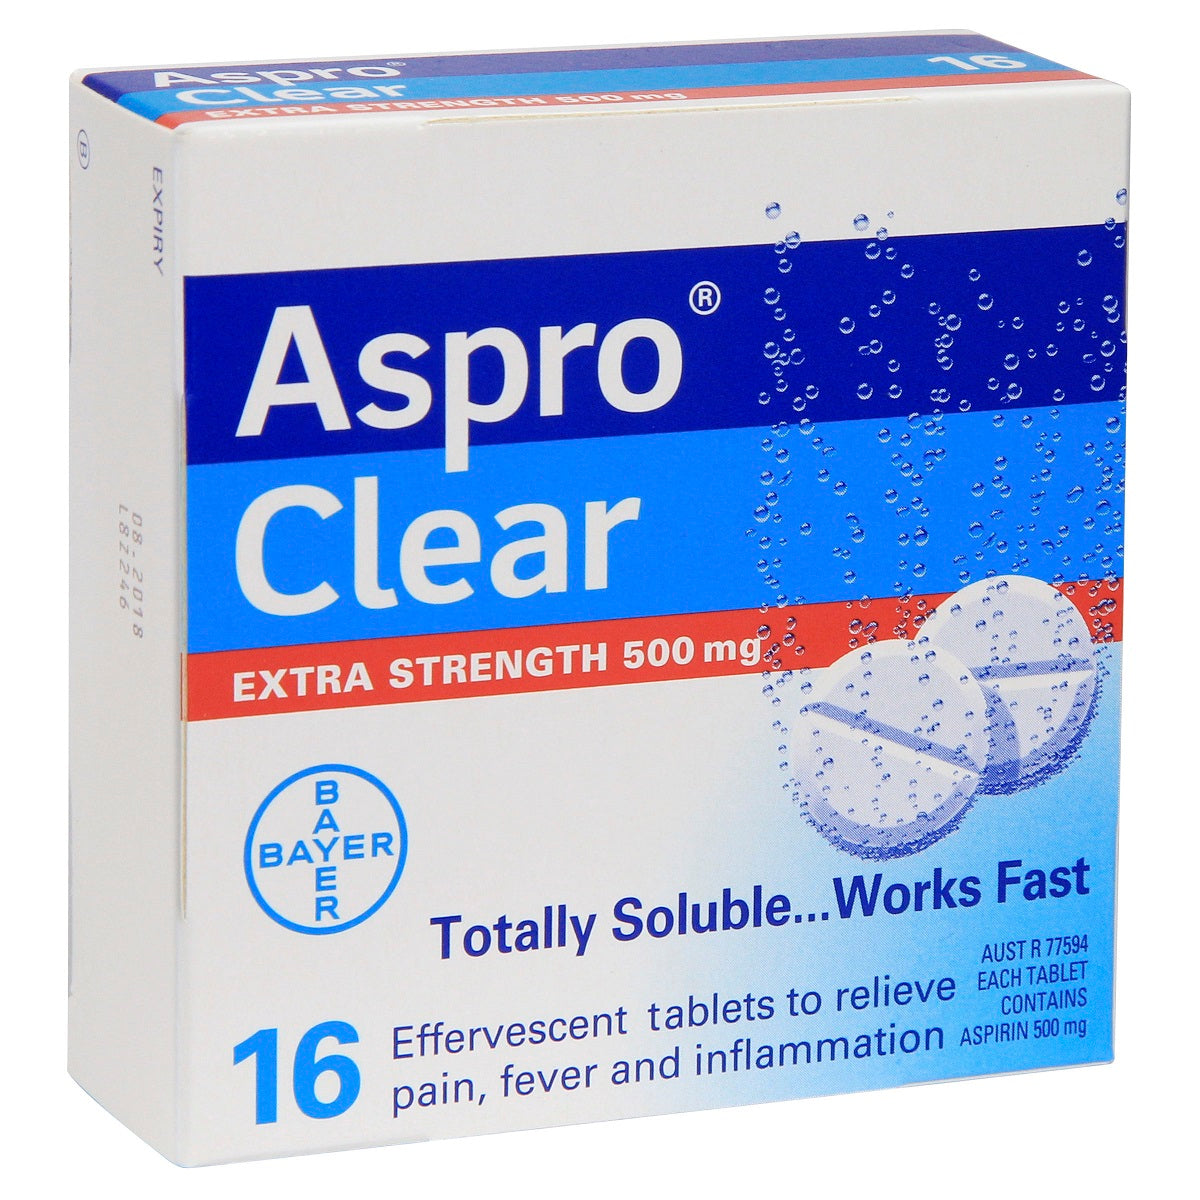 Aspro Clear Extra Strength 500mg Pain Relief